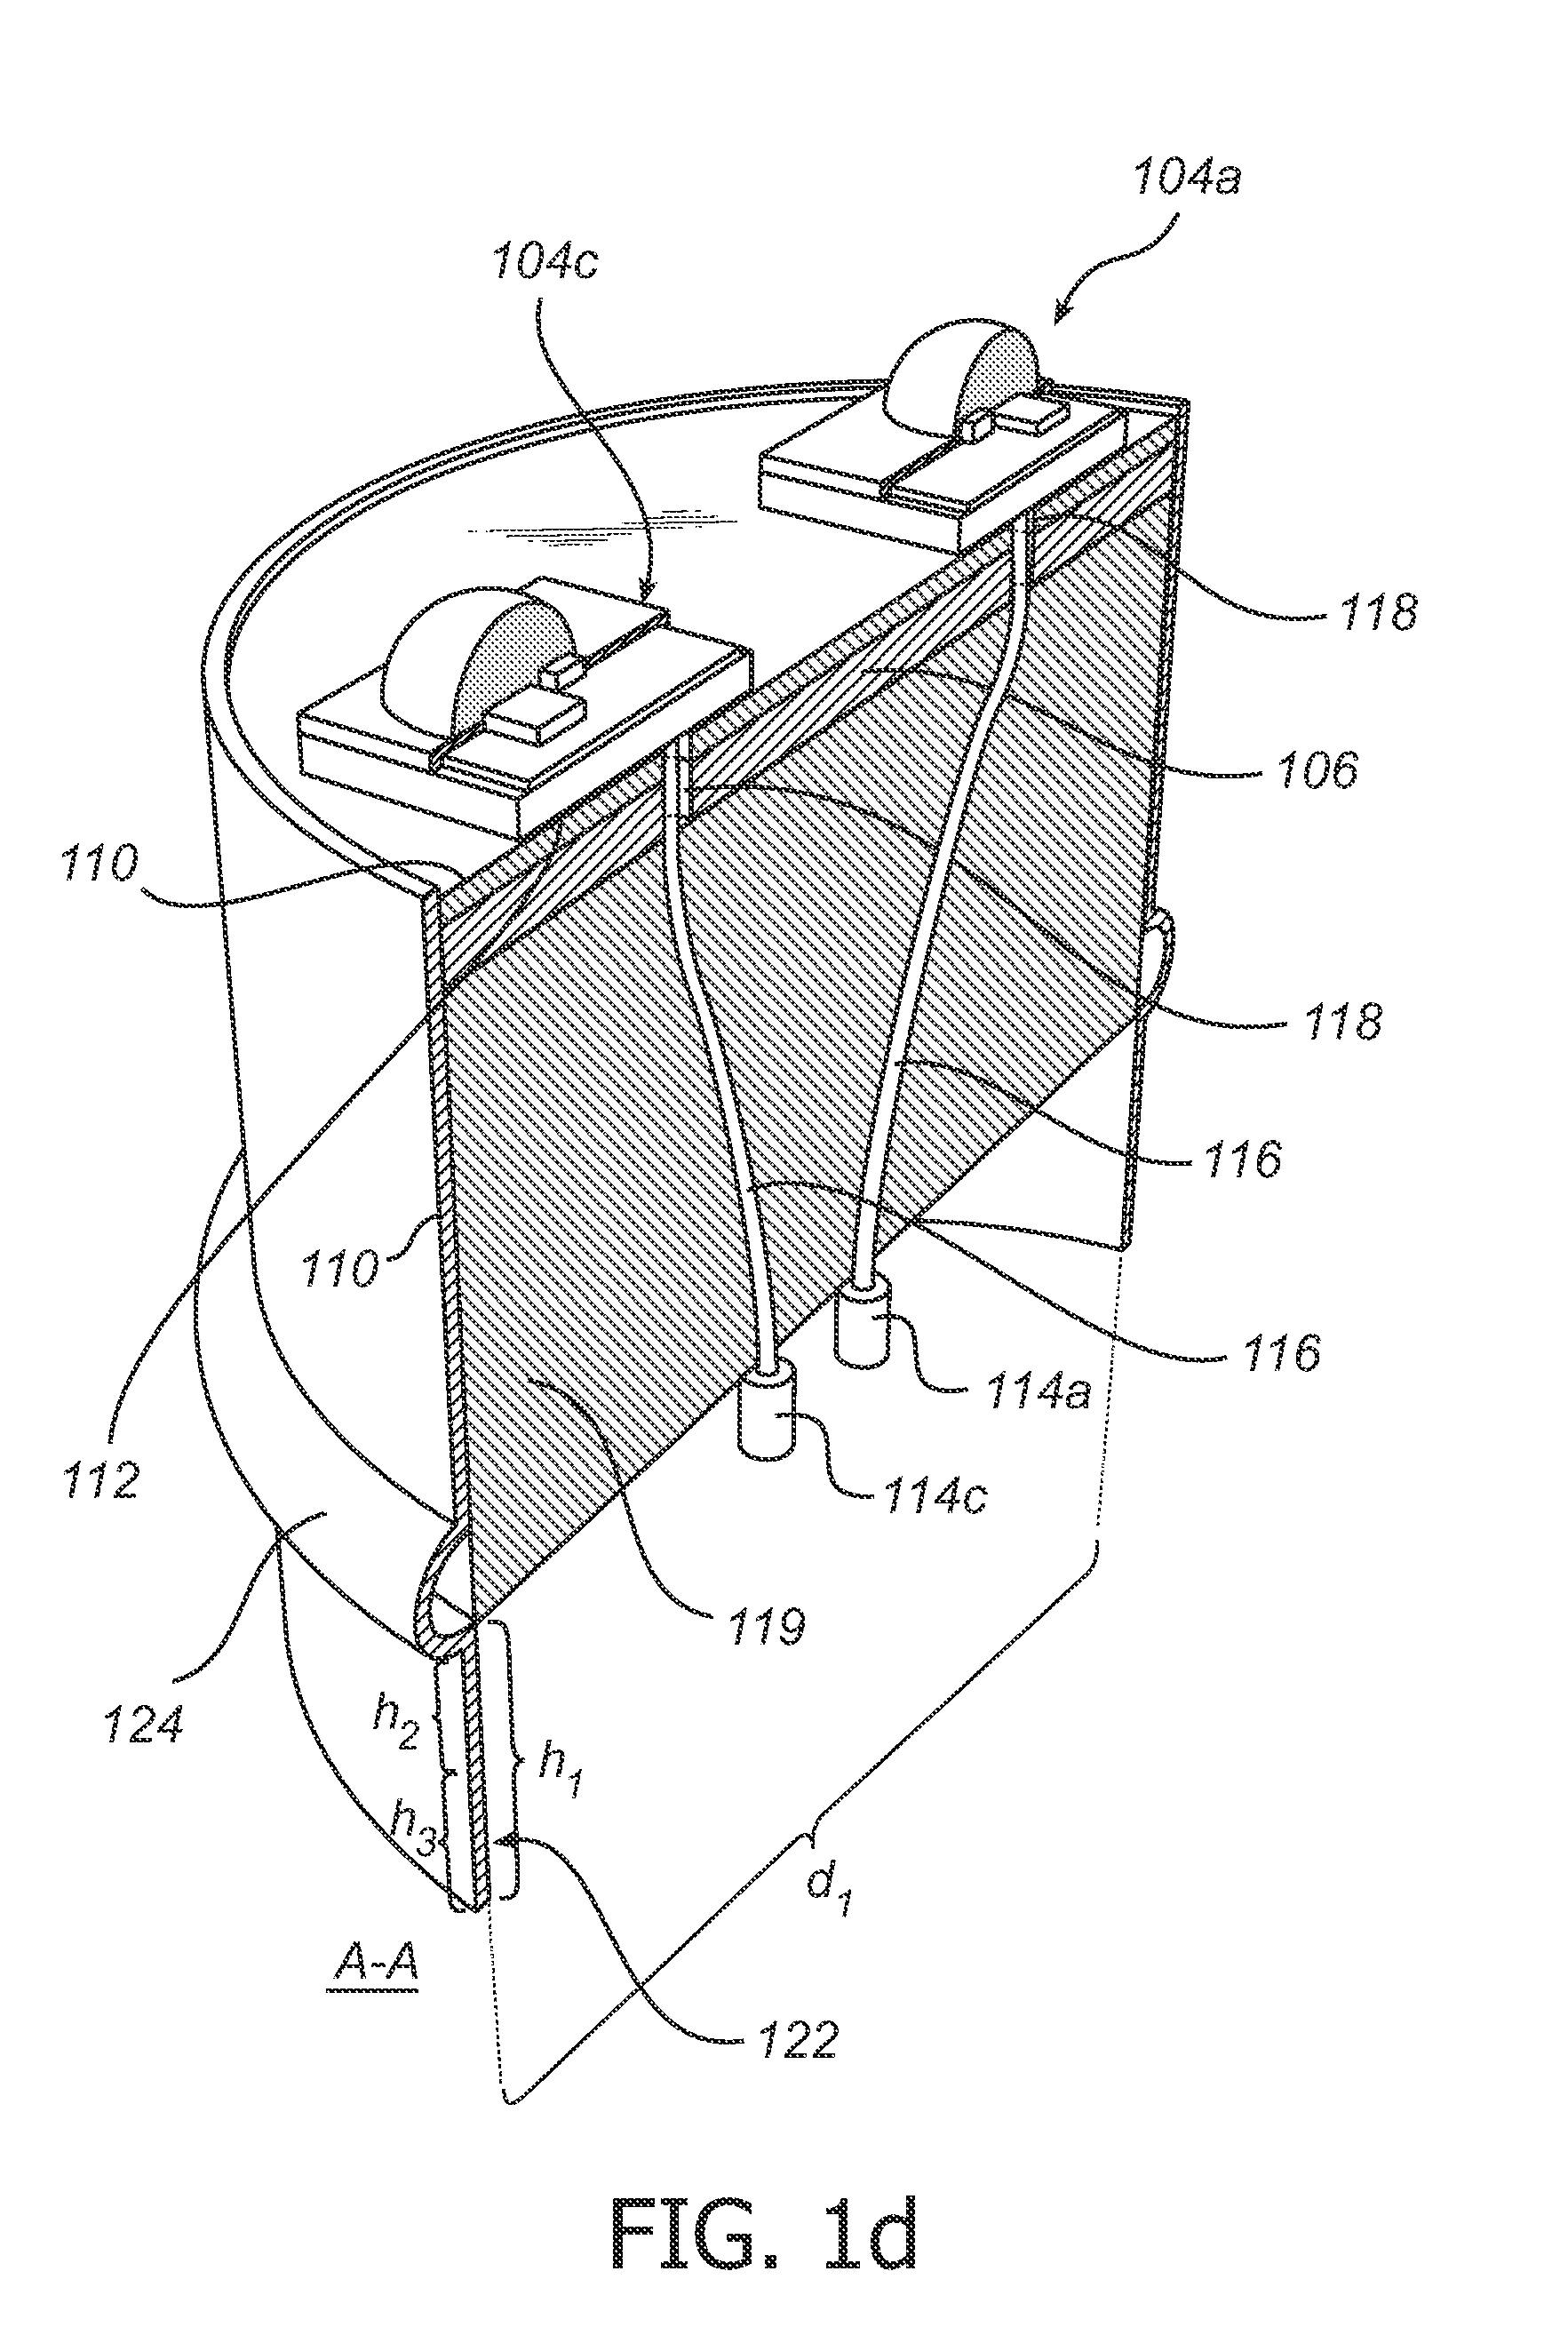 Method of mounting a LED module to a heat sink